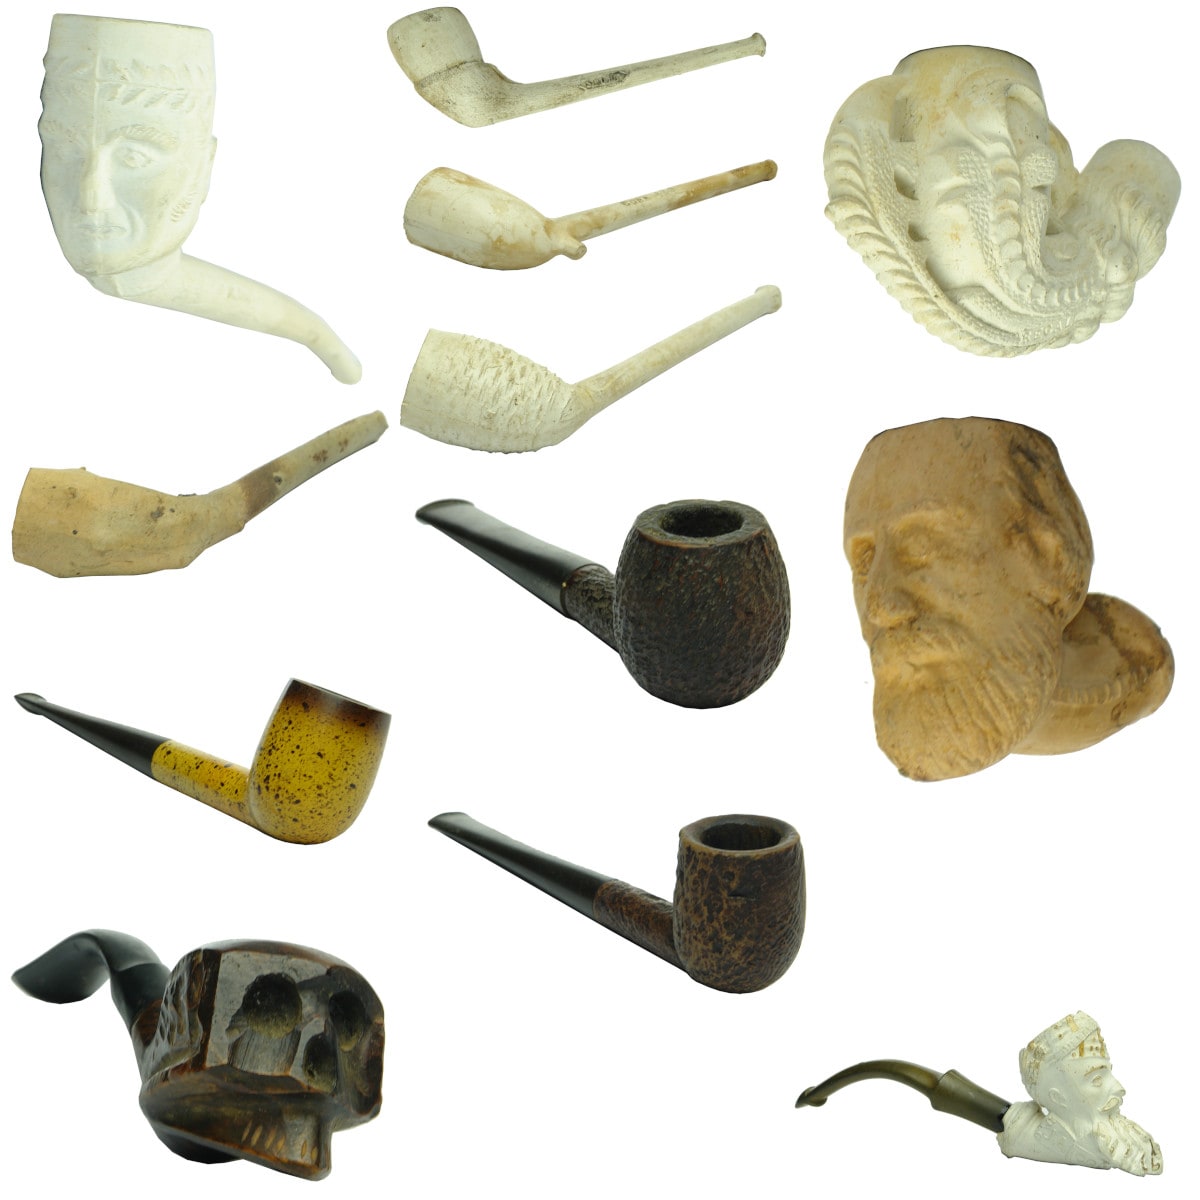 12 Clay Pipes & Bowls. McDougall Glasgow with Mans head. Sport. Cork. Basket Weave. raised lumps; Large Dragons Claw. Regal; Garibaldi; Round bowls; Hand carved skull. Jacob.